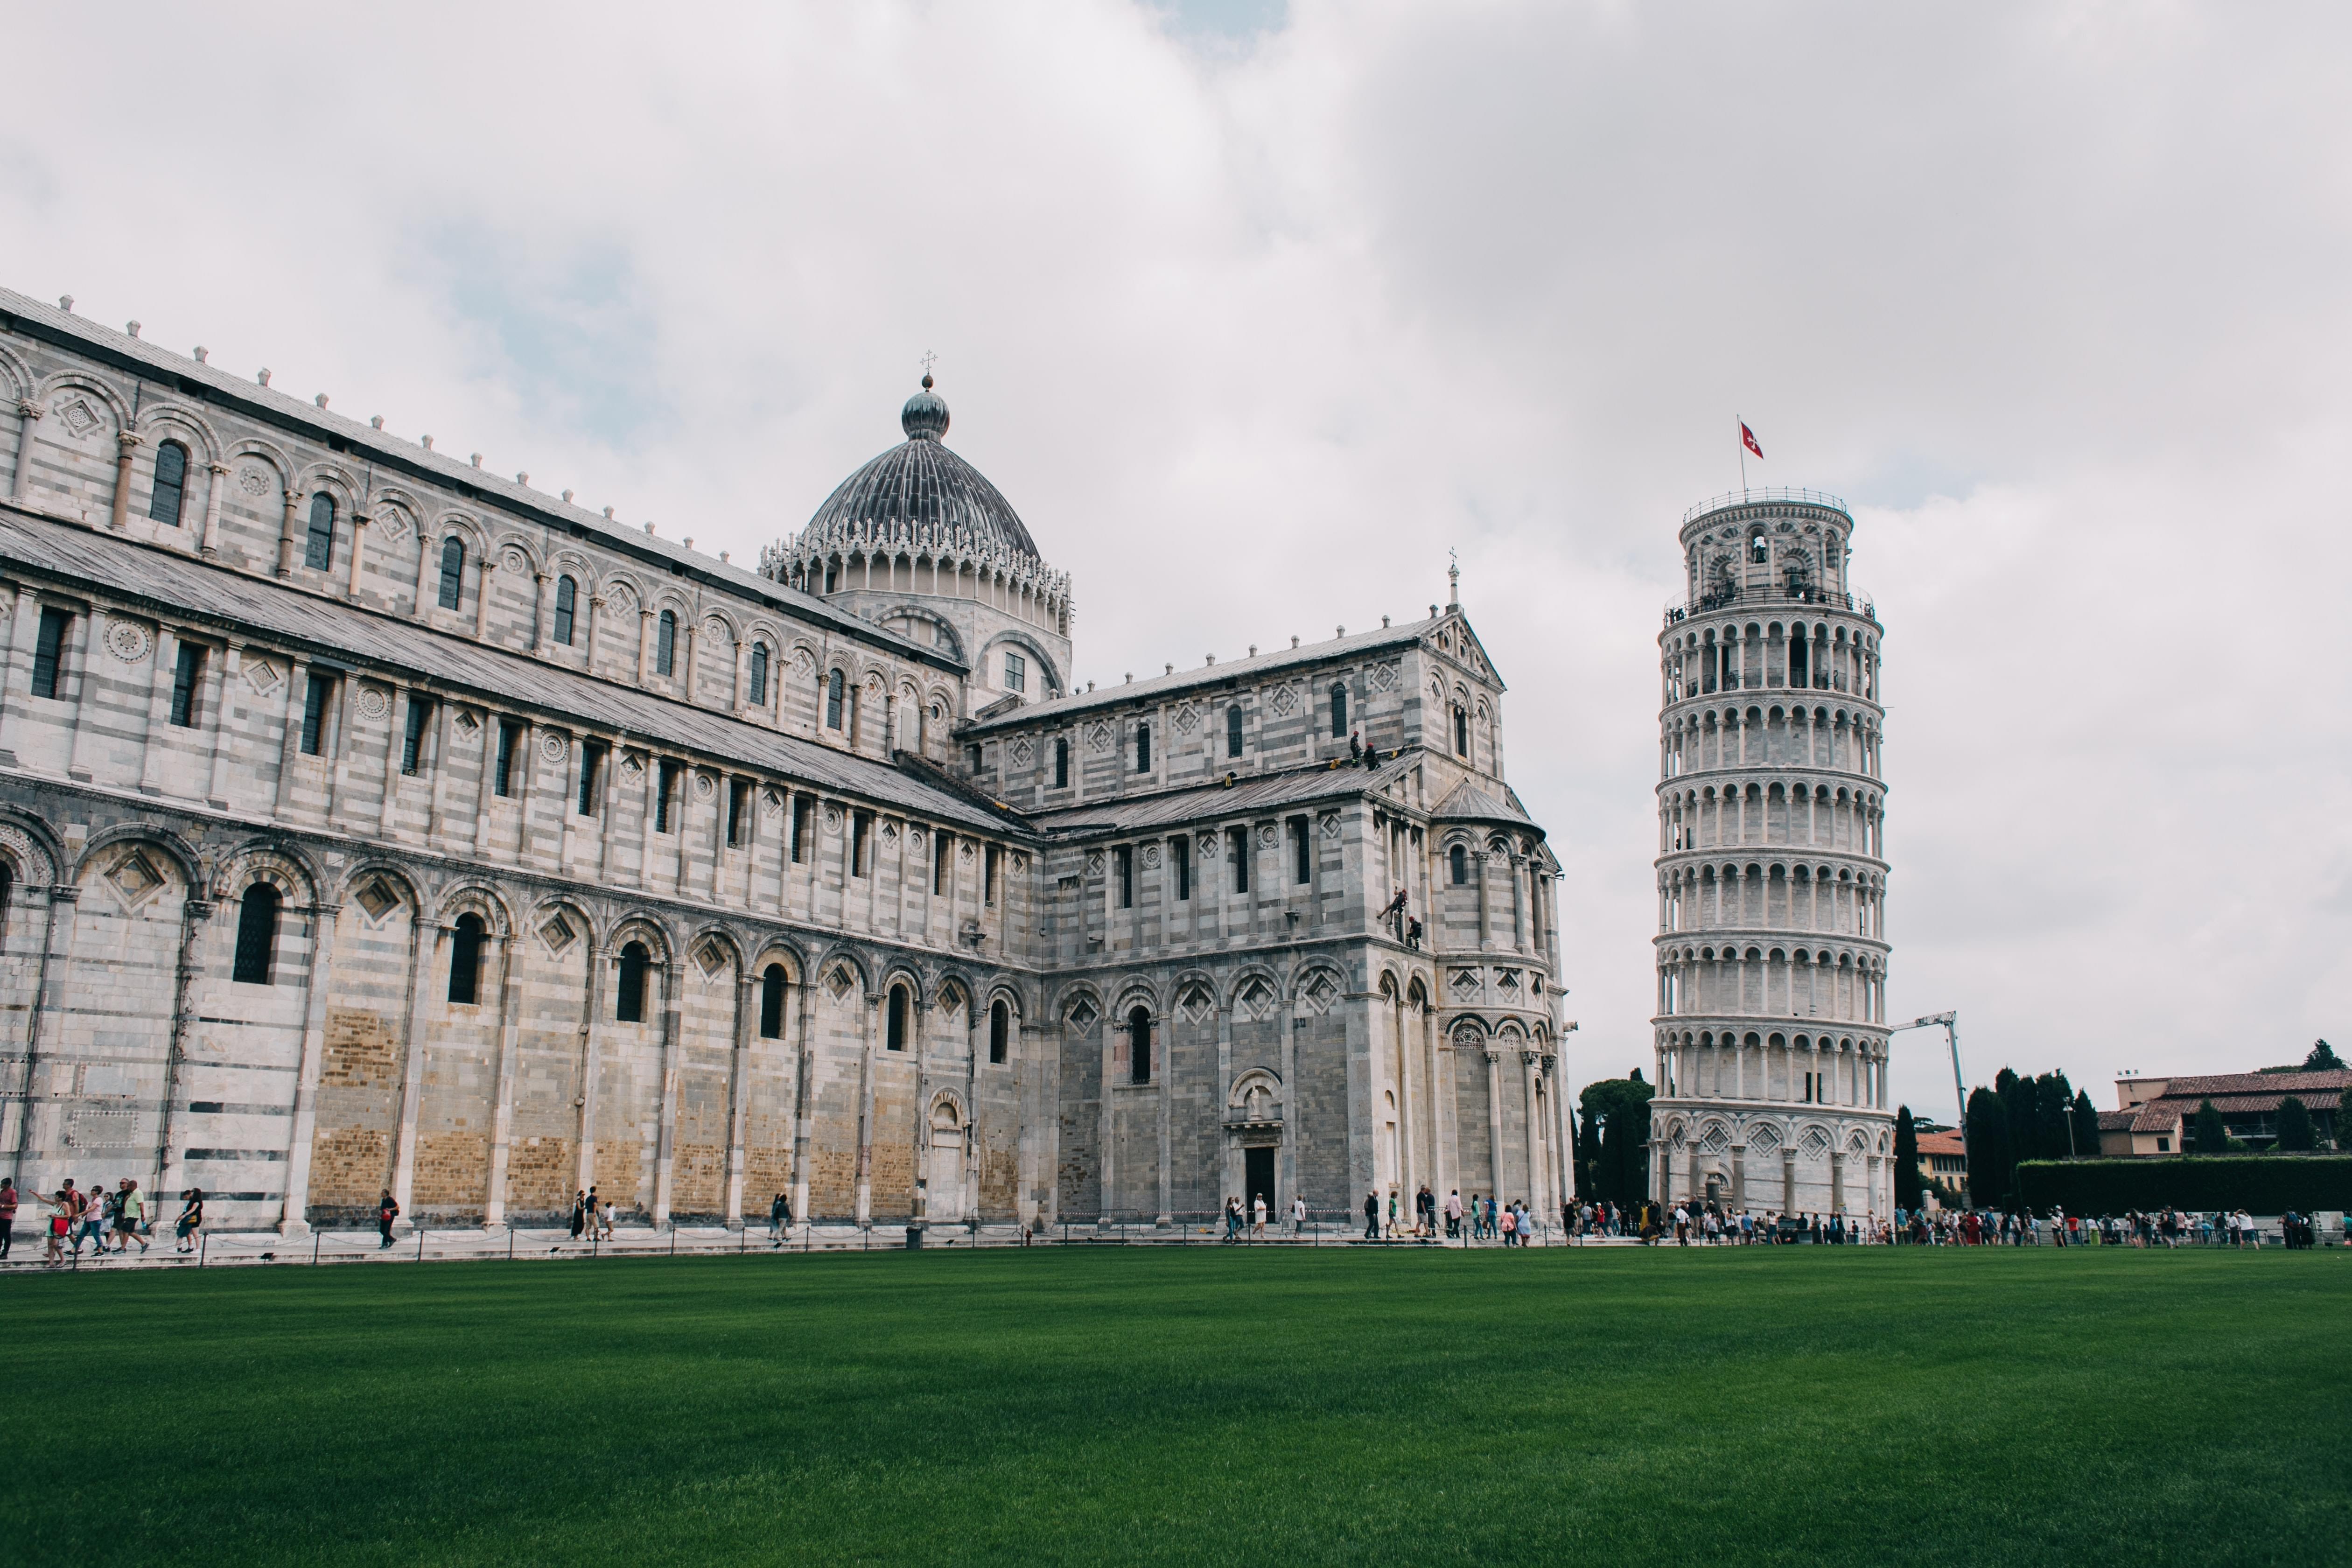 Reach Leaning Tower of Pisa